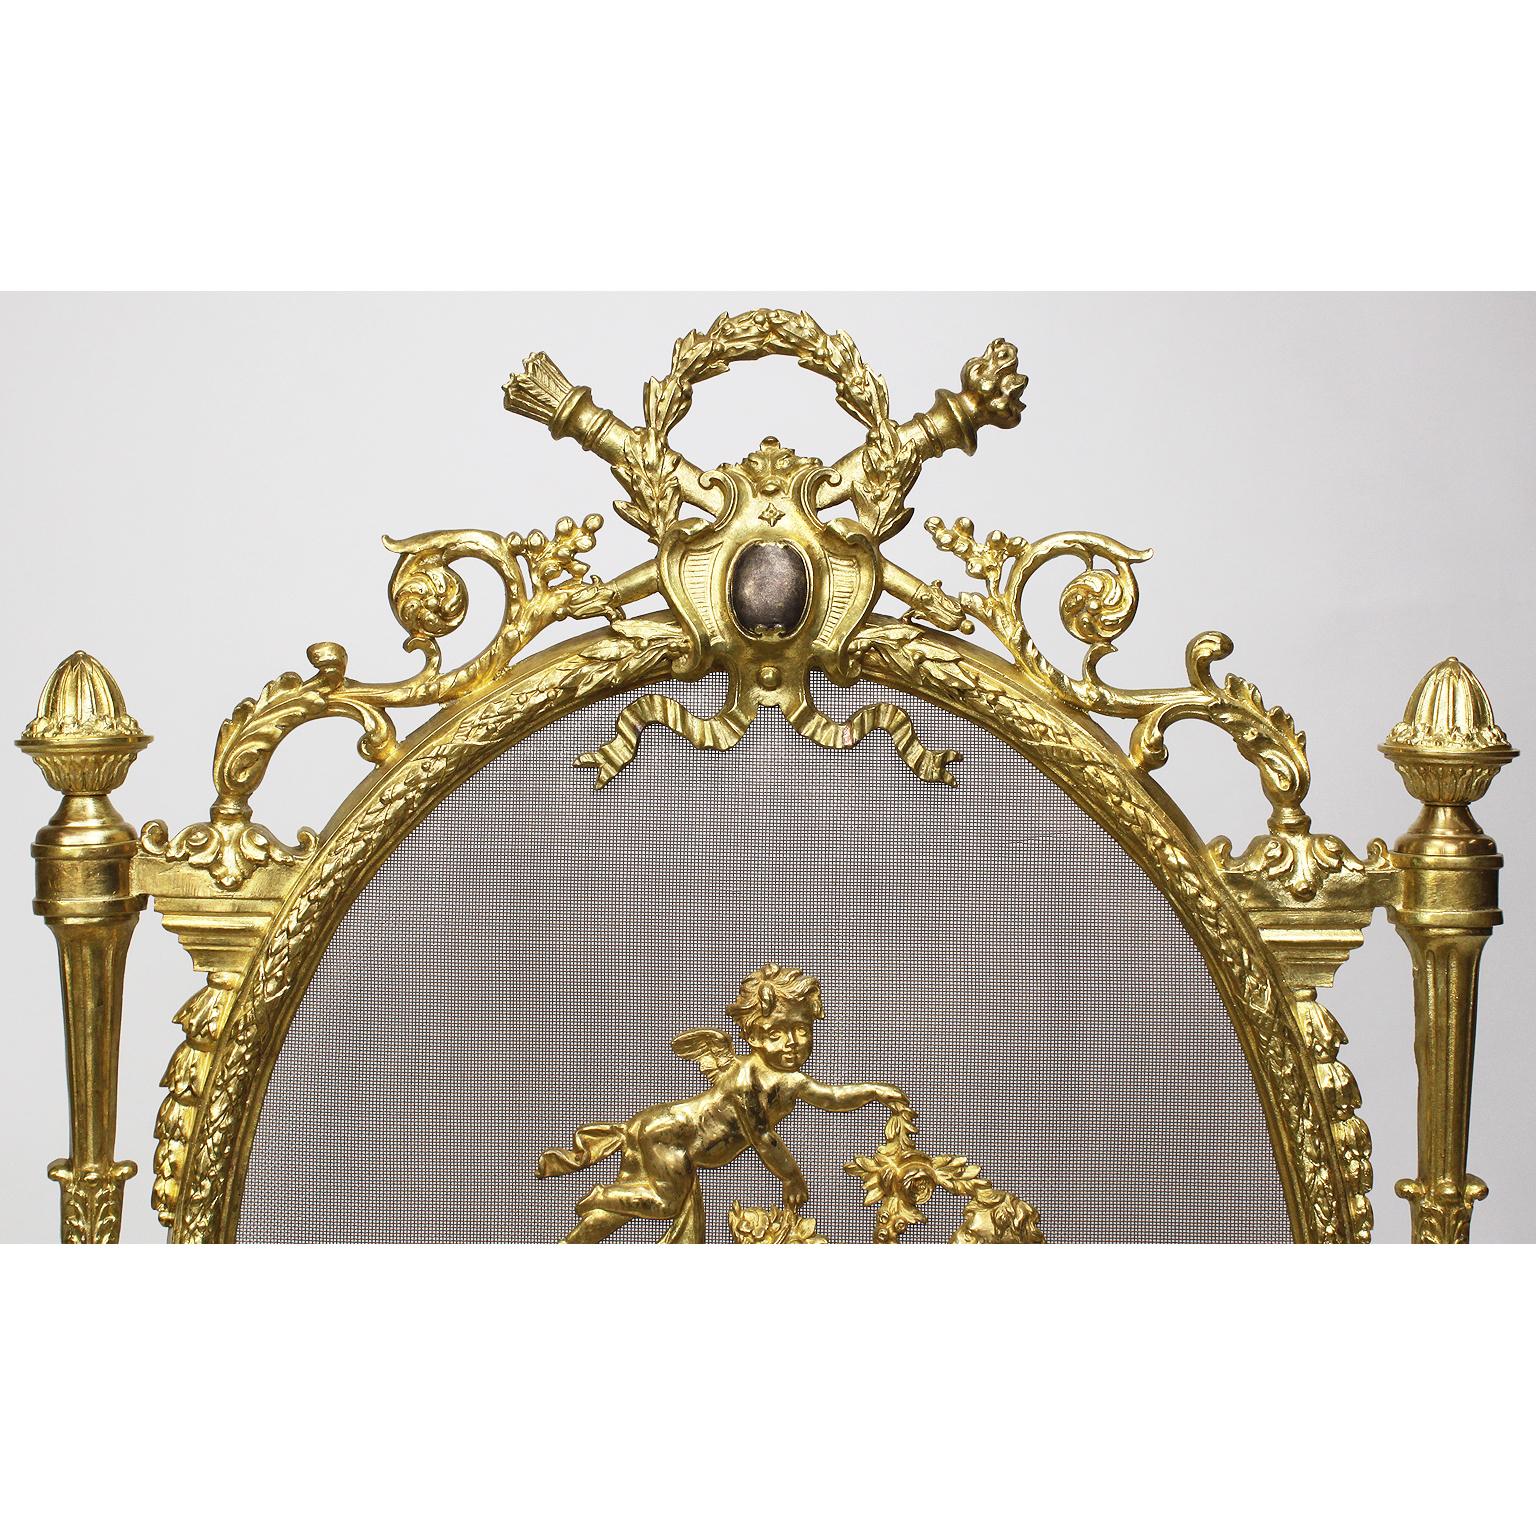 Belle Époque French 19th-20th Century Louis XV Style Gilt-Bronze Fireplace Screen For Sale